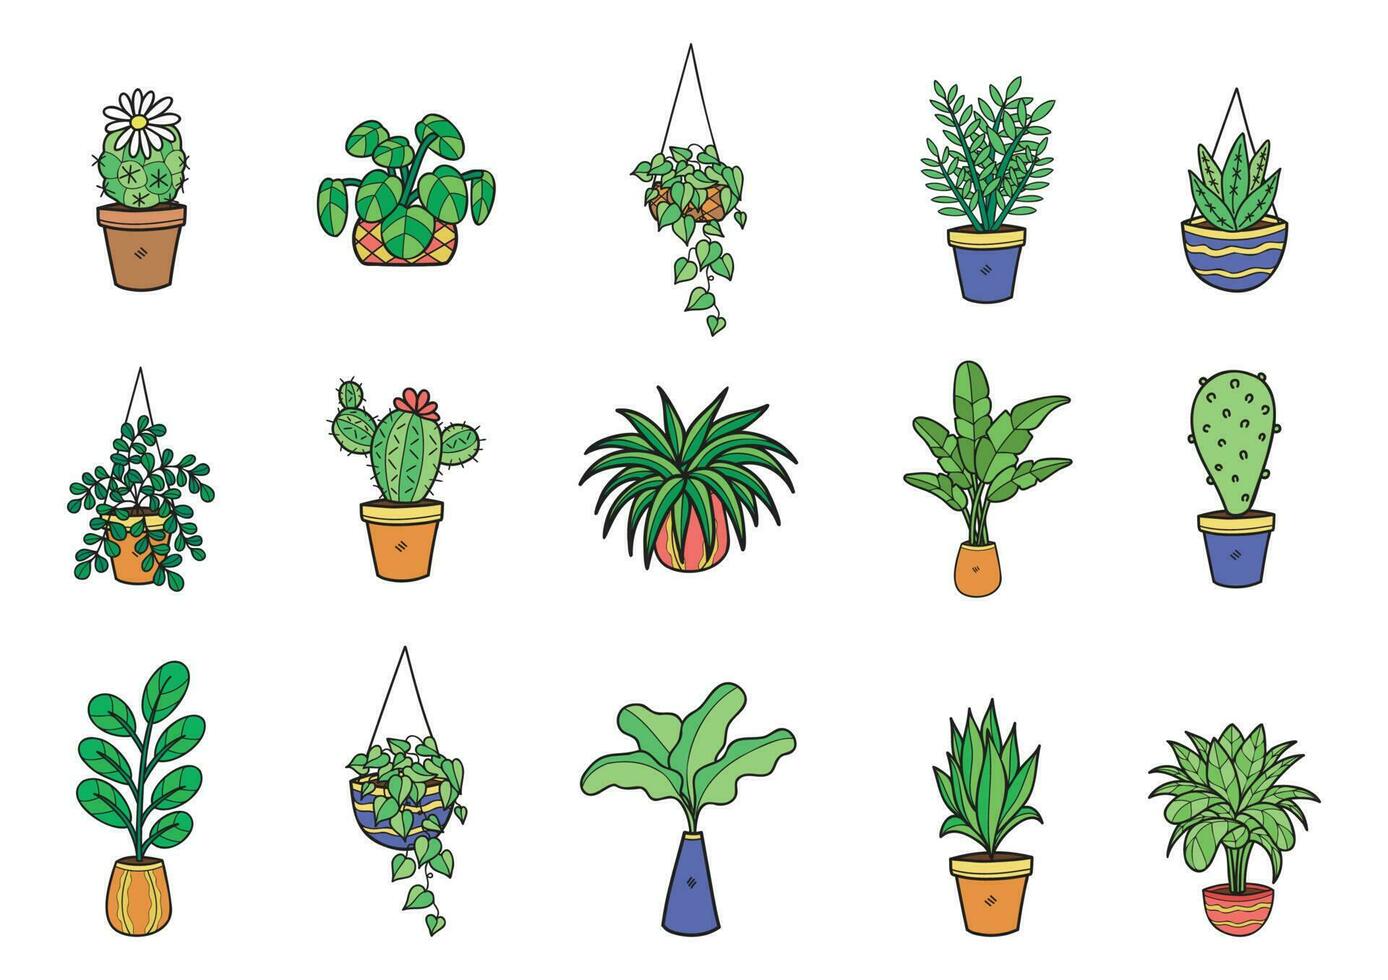 green organic houseplants elements collection vector